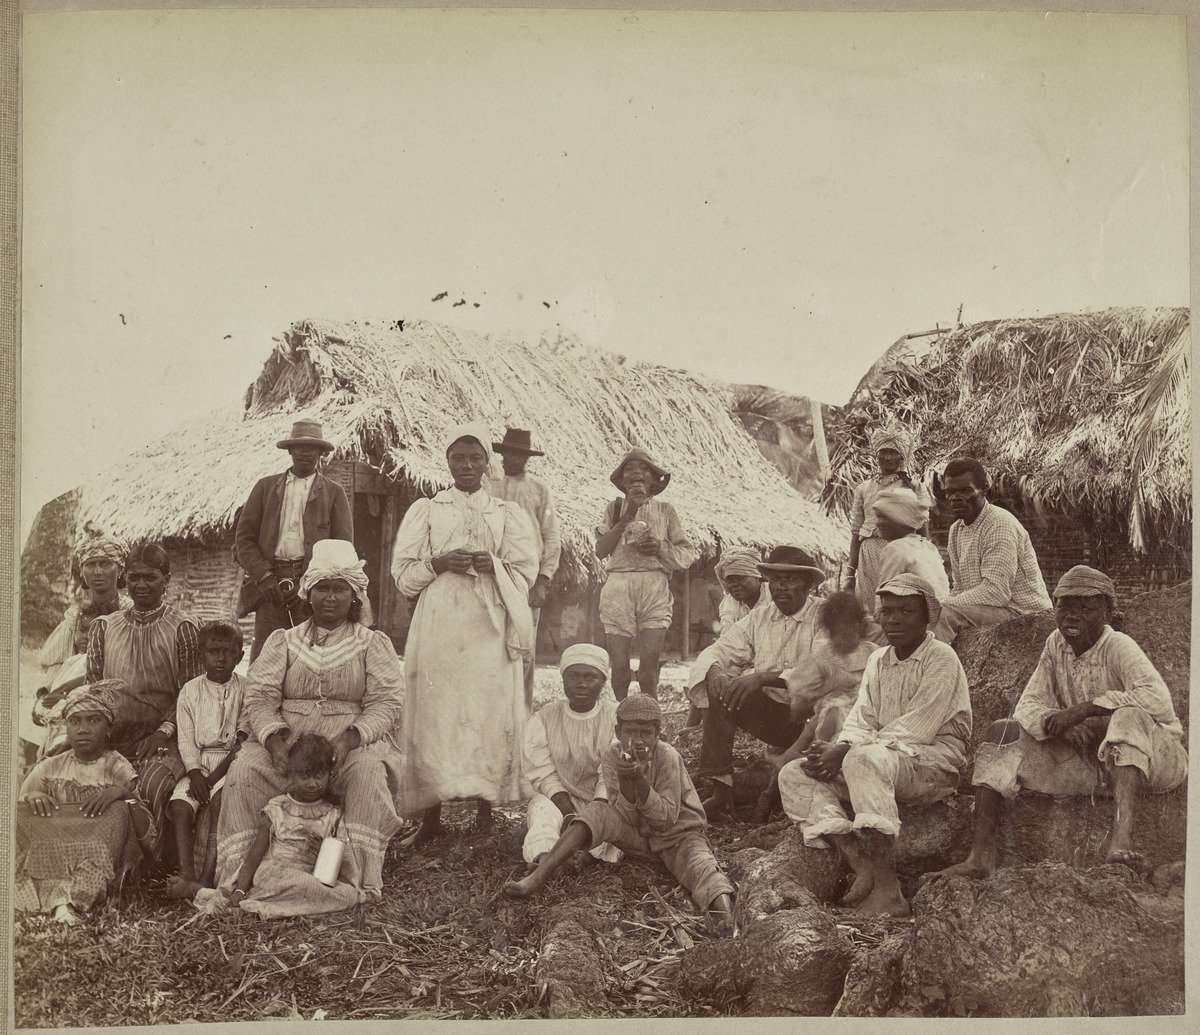  Unknown,  Family at Home, Blue Mountains, Jamaica , circa 1890, albumen print, 9 3/4 × 13 11/16 inches. Art Gallery of Ontario. Gift of Patrick Montgomery, through the American Friends of the Art Gallery of Ontario Inc., 2019. 2019/3075. Photo © AGO